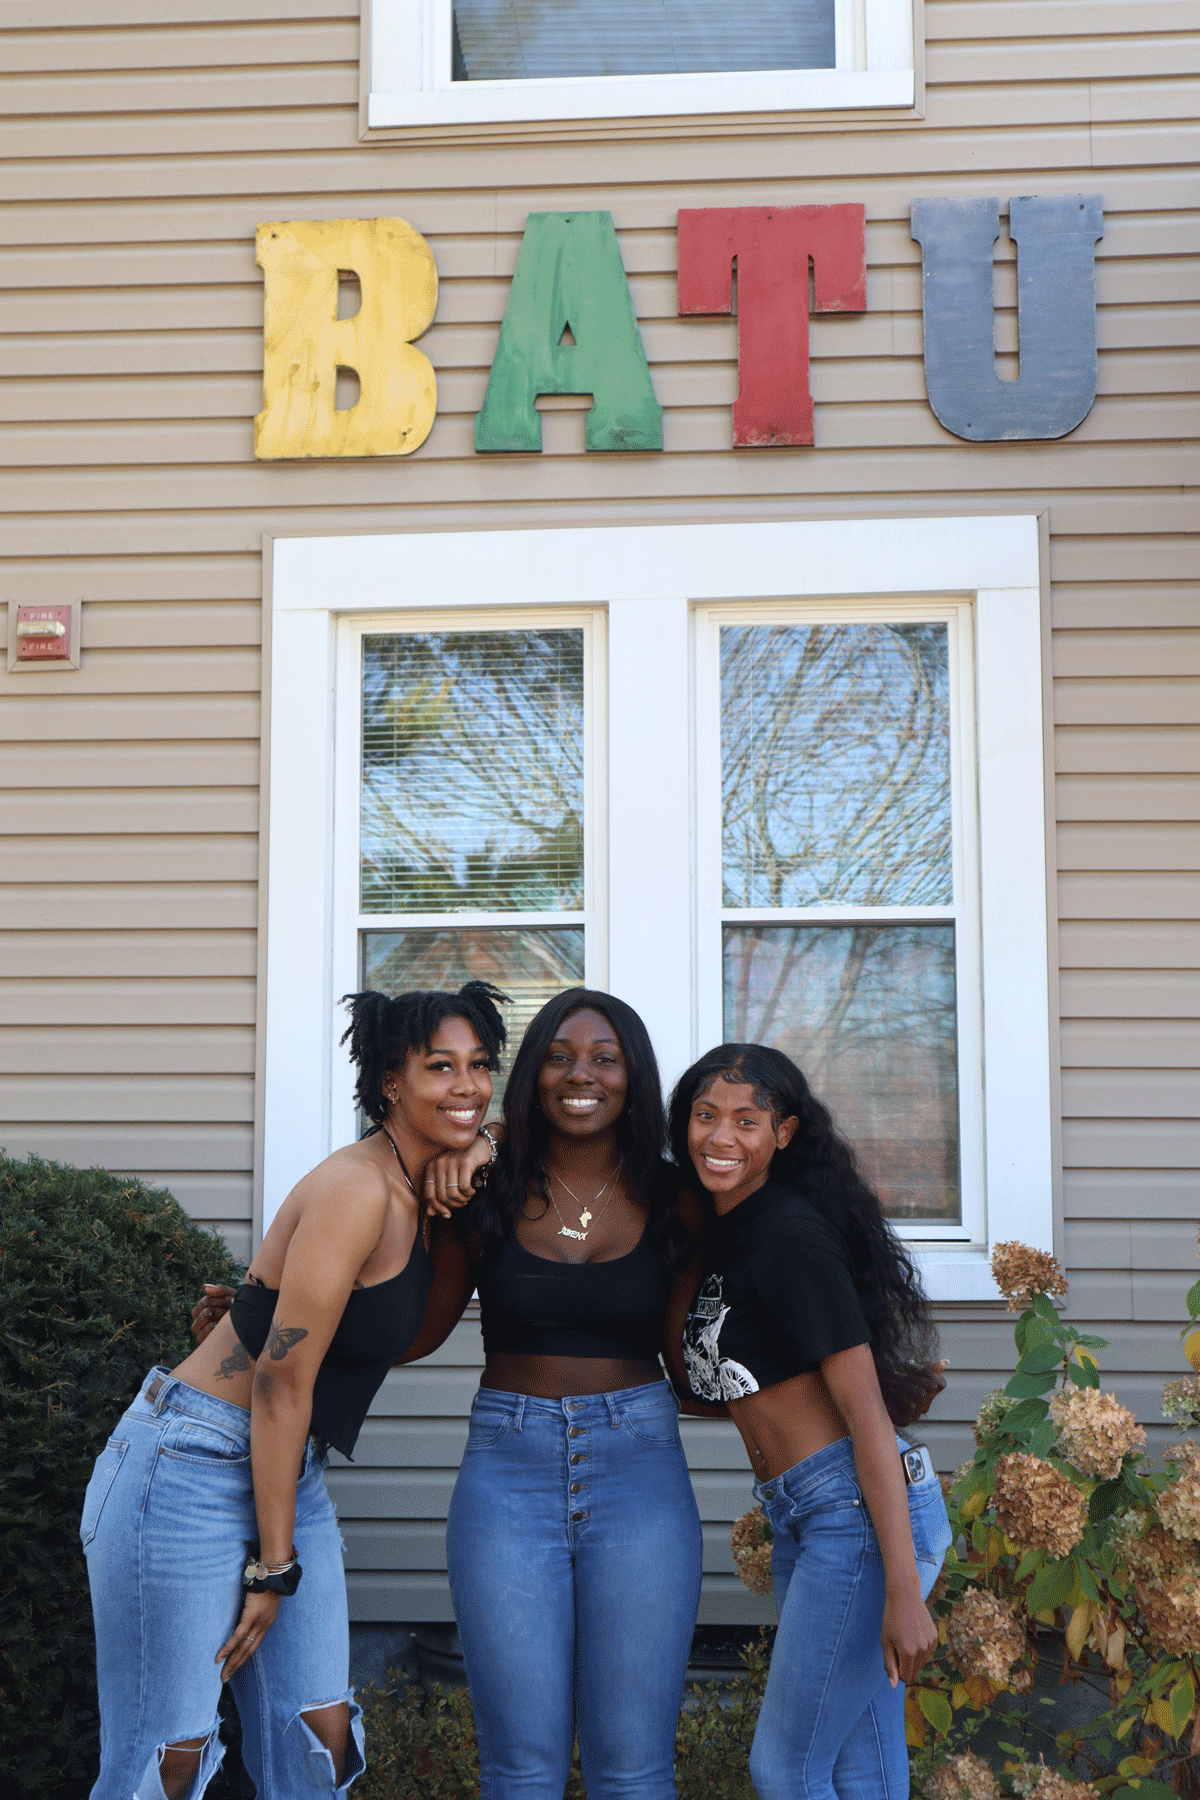 Three roommates stand in front of the house embracing.